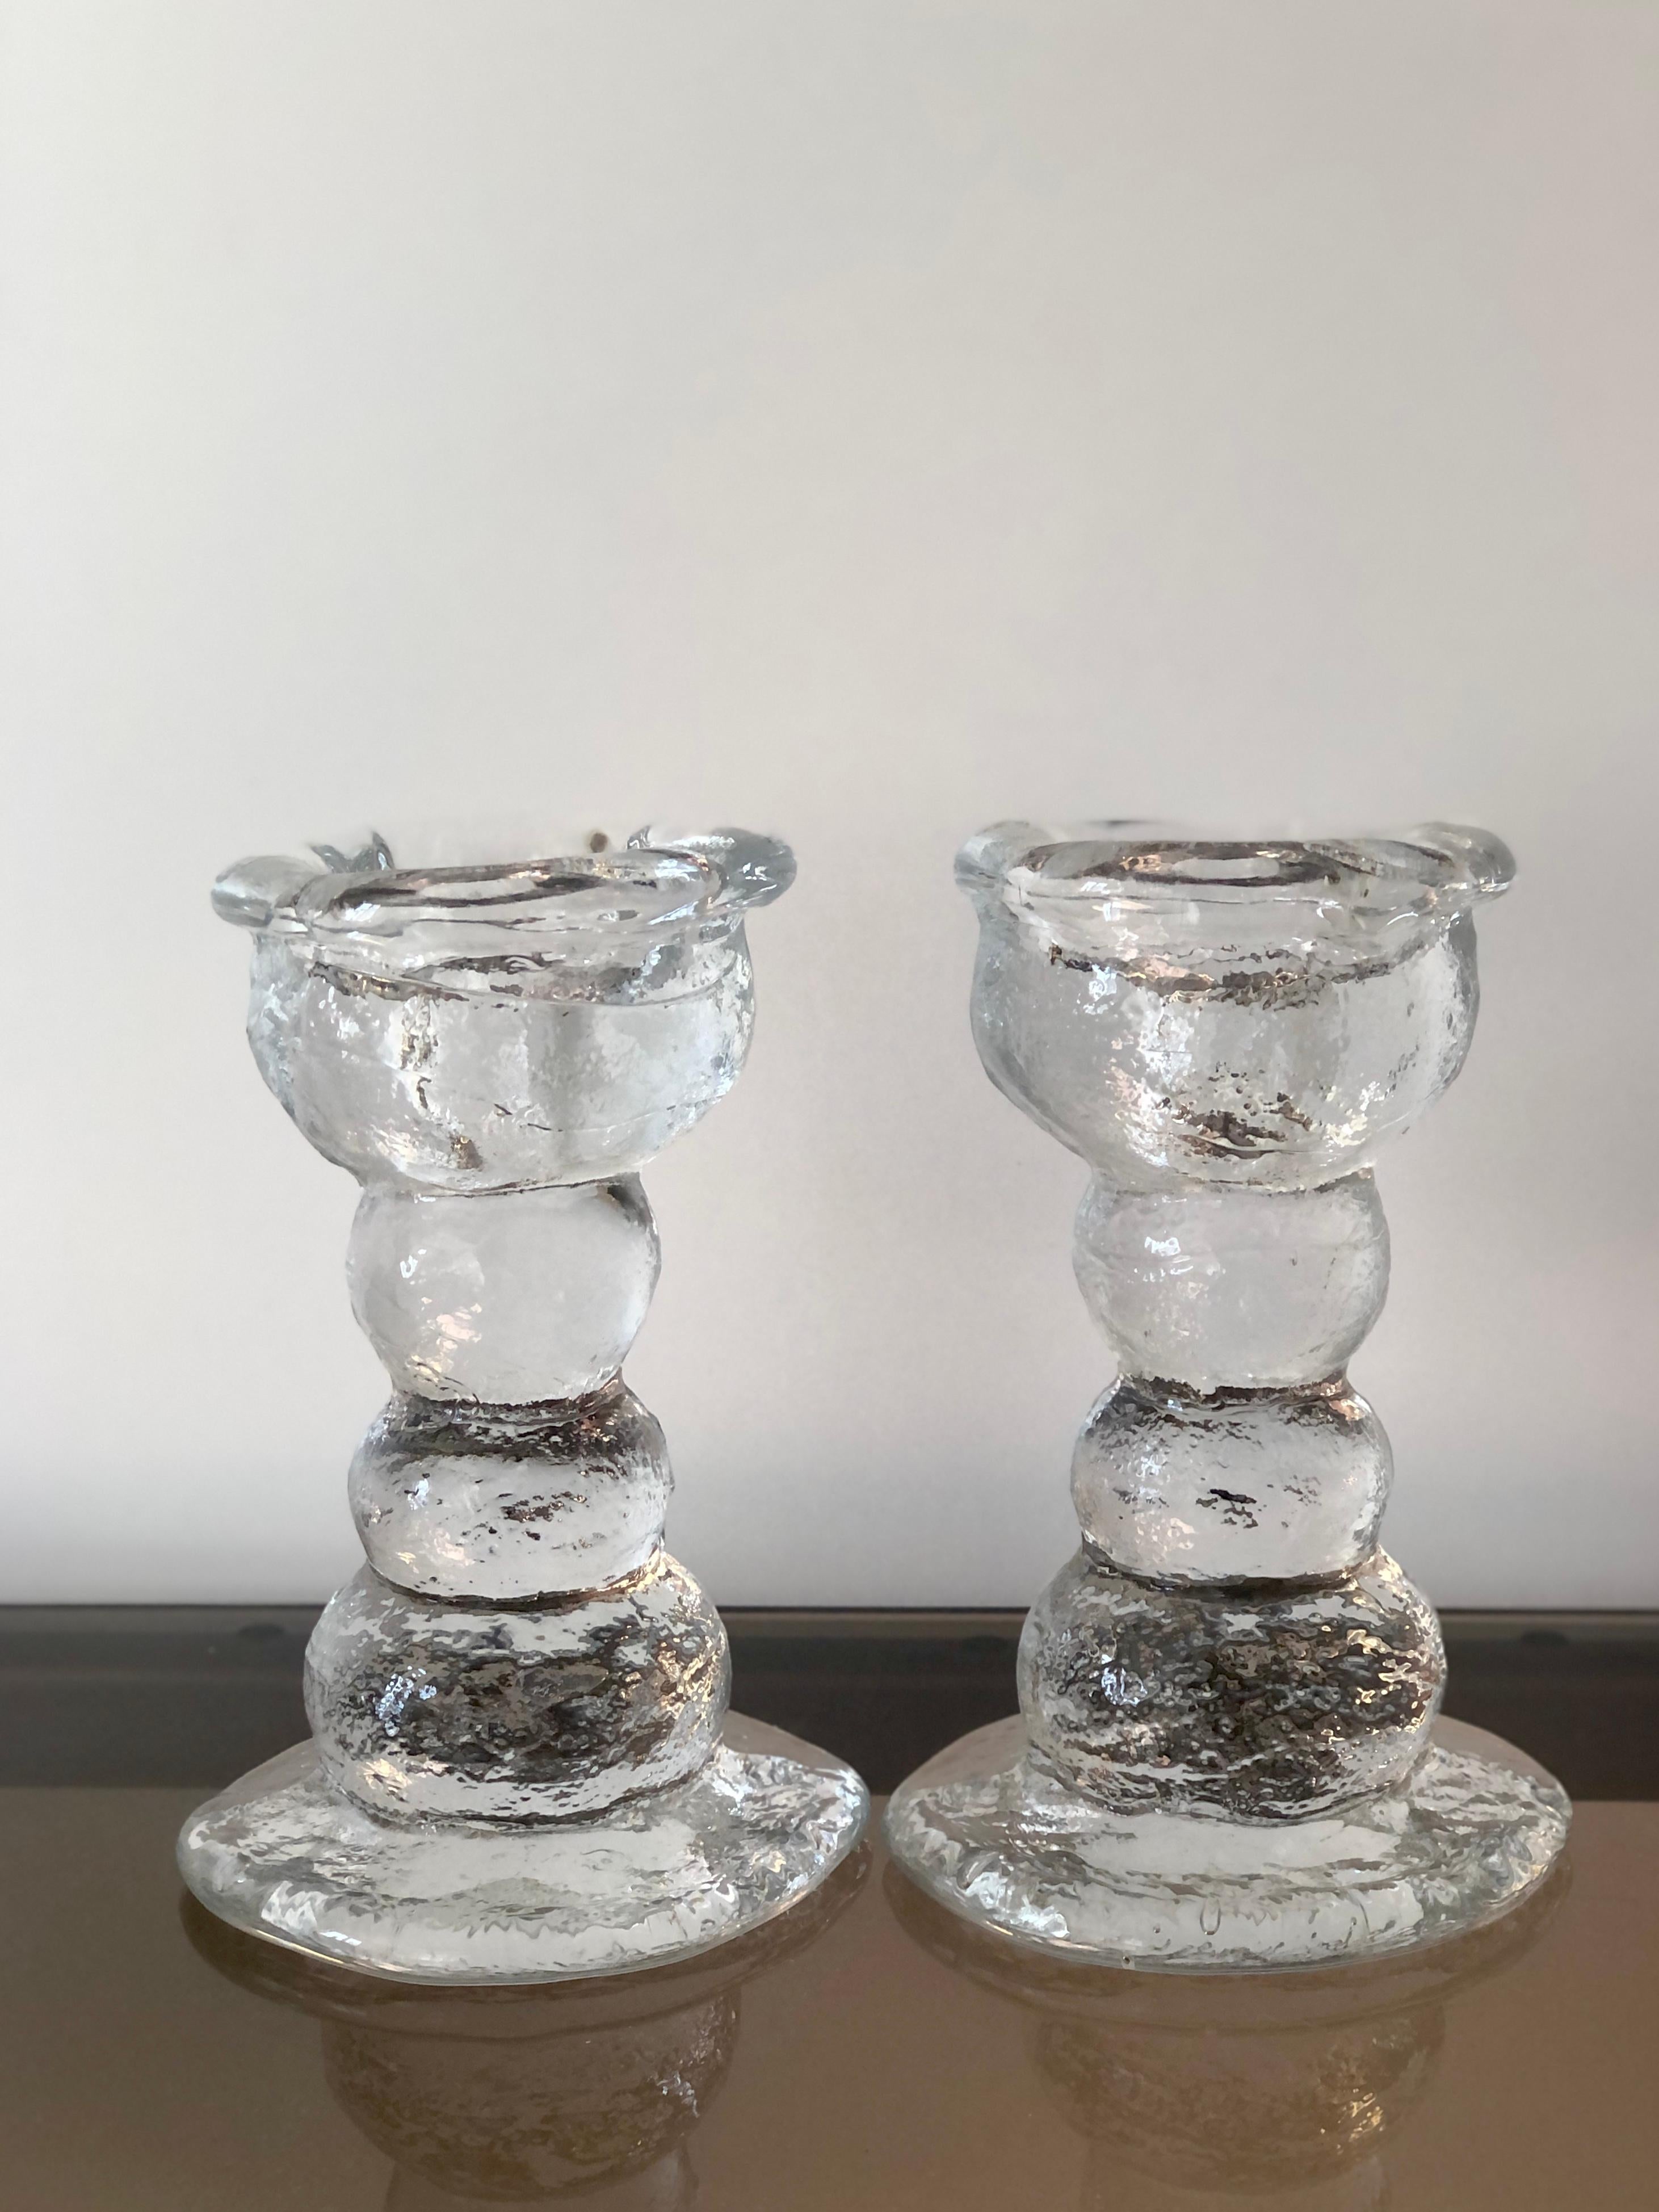 Mid Century Modern 1970s brutalist designed Candlesticks designed by Pertti Santalahti for Humppila Finland. Very heavy and robust. 
Clear glass, fitting long candles or tealights.
Measures: H 17 cm D 12 cm to base.